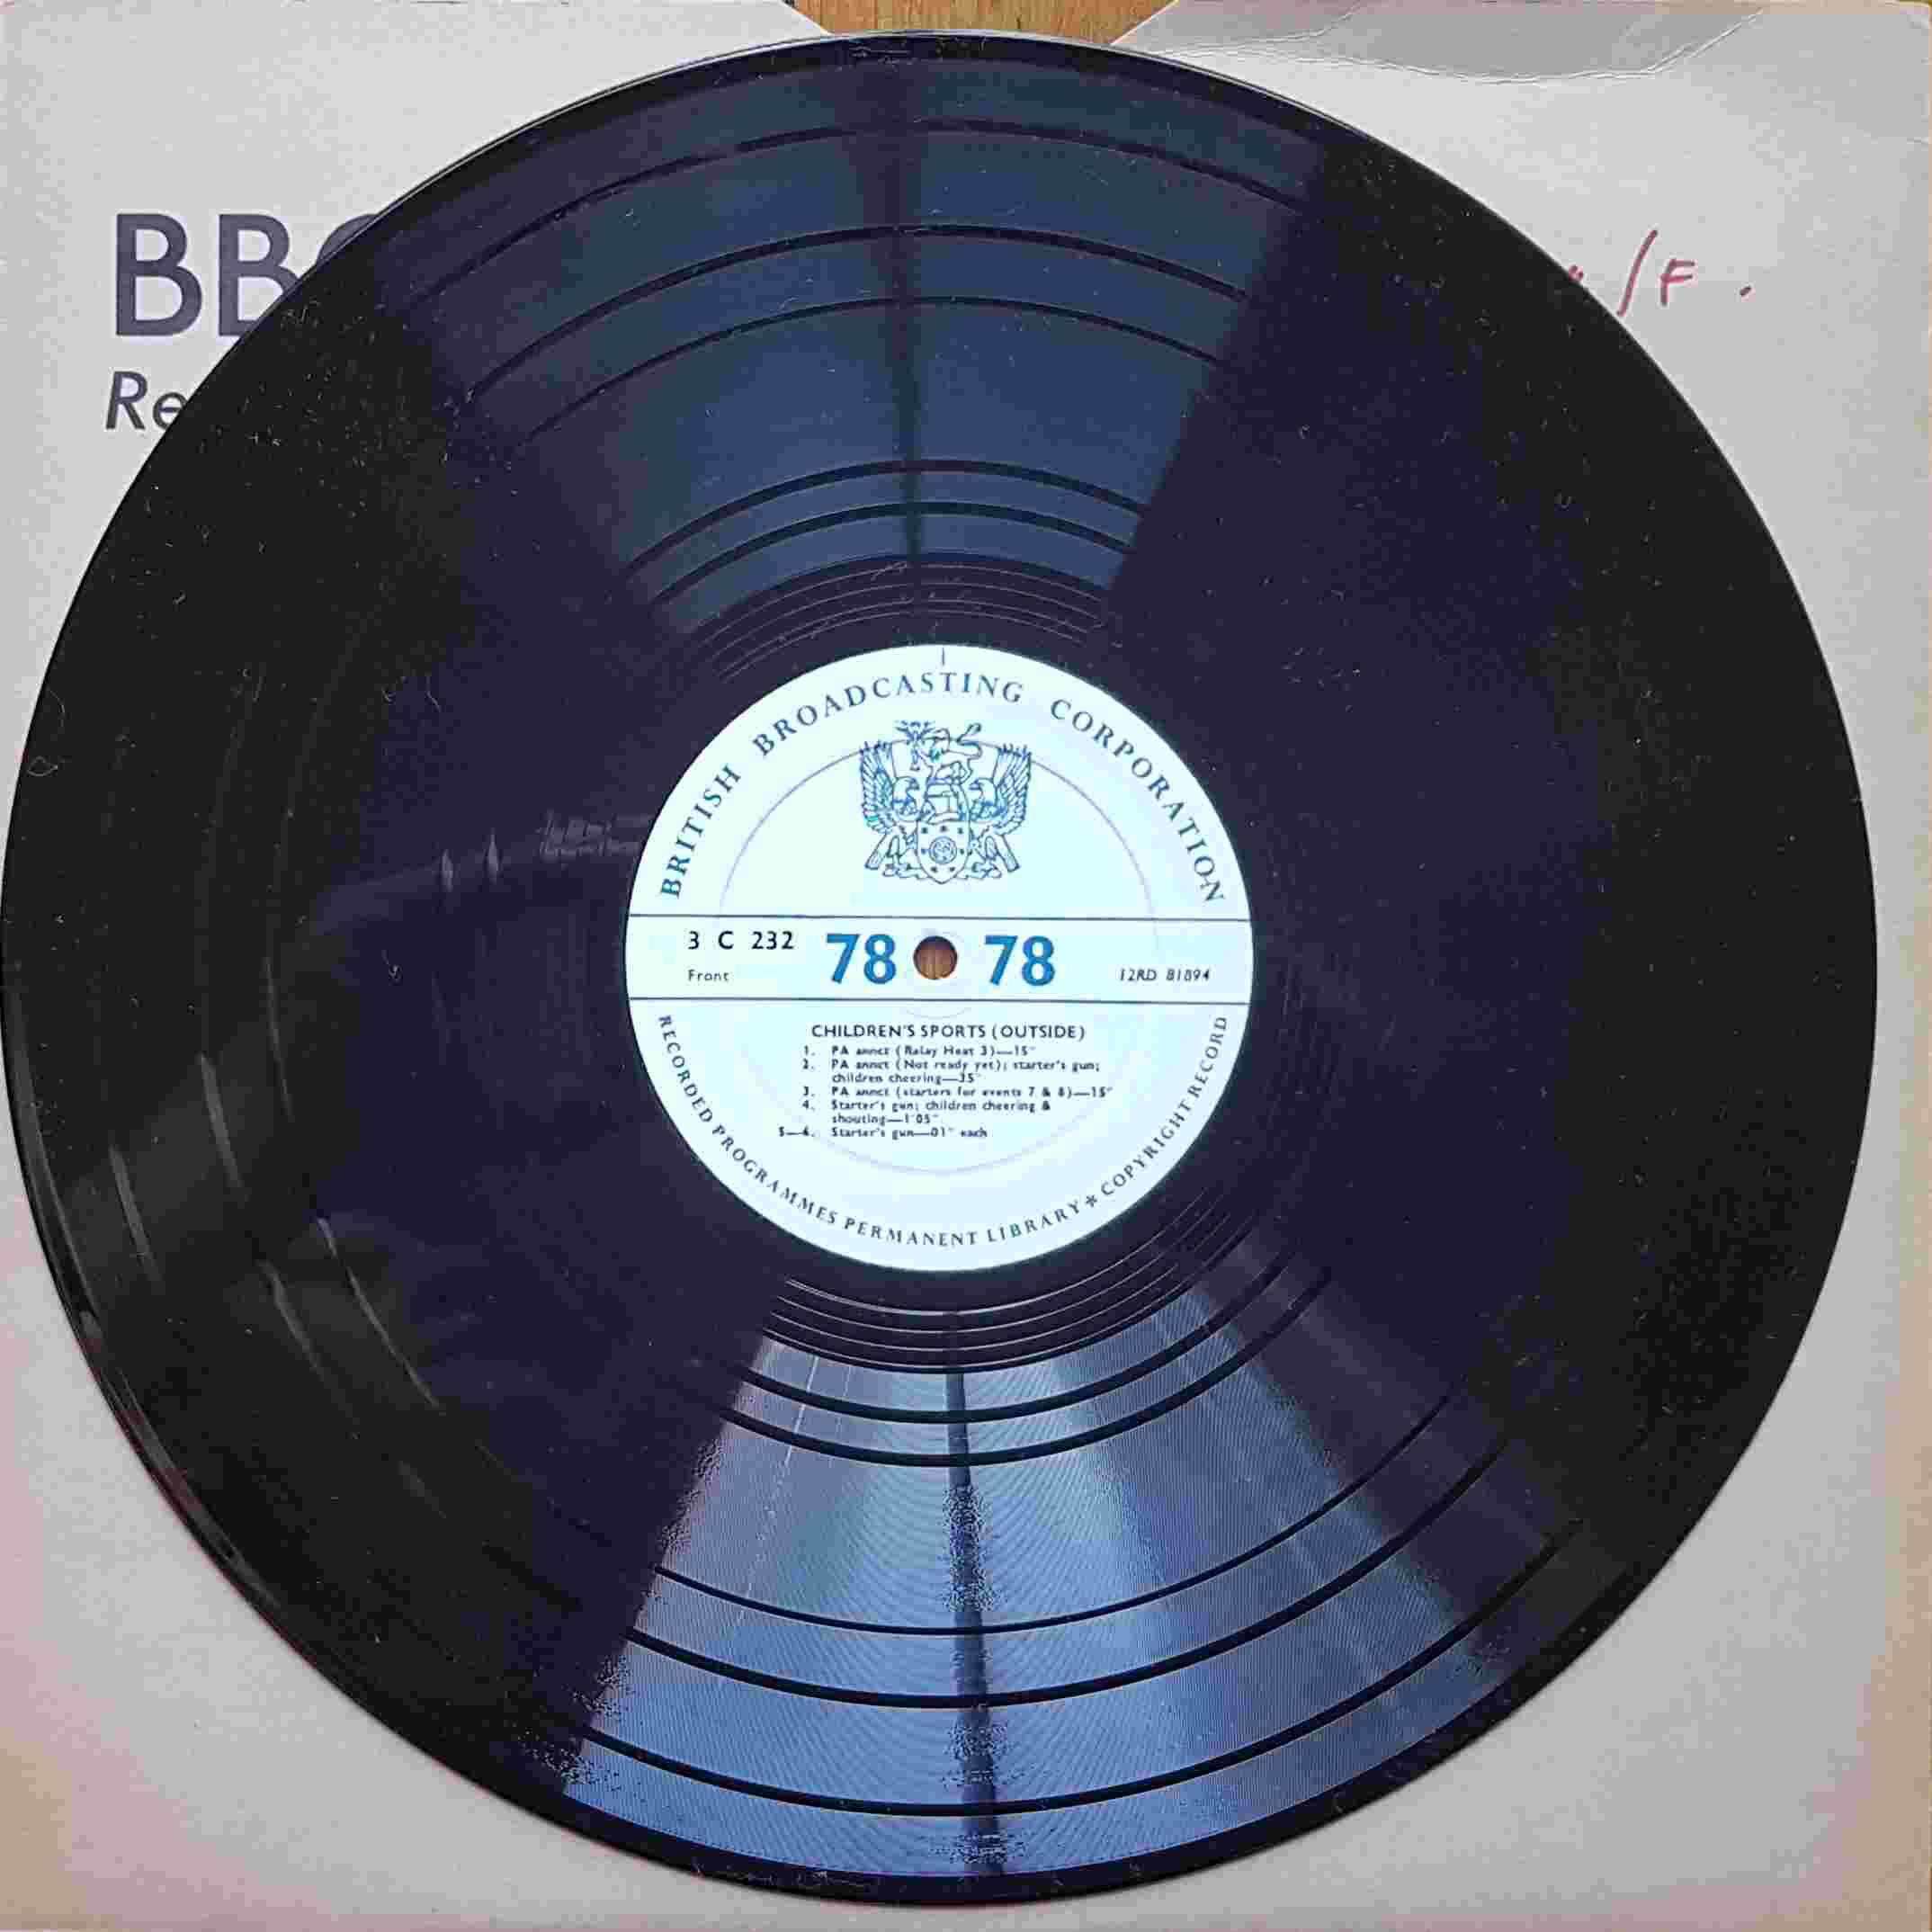 Picture of 3 C 232 Children's sports / Hospital reception by artist Not registered from the BBC 78 - Records and Tapes library